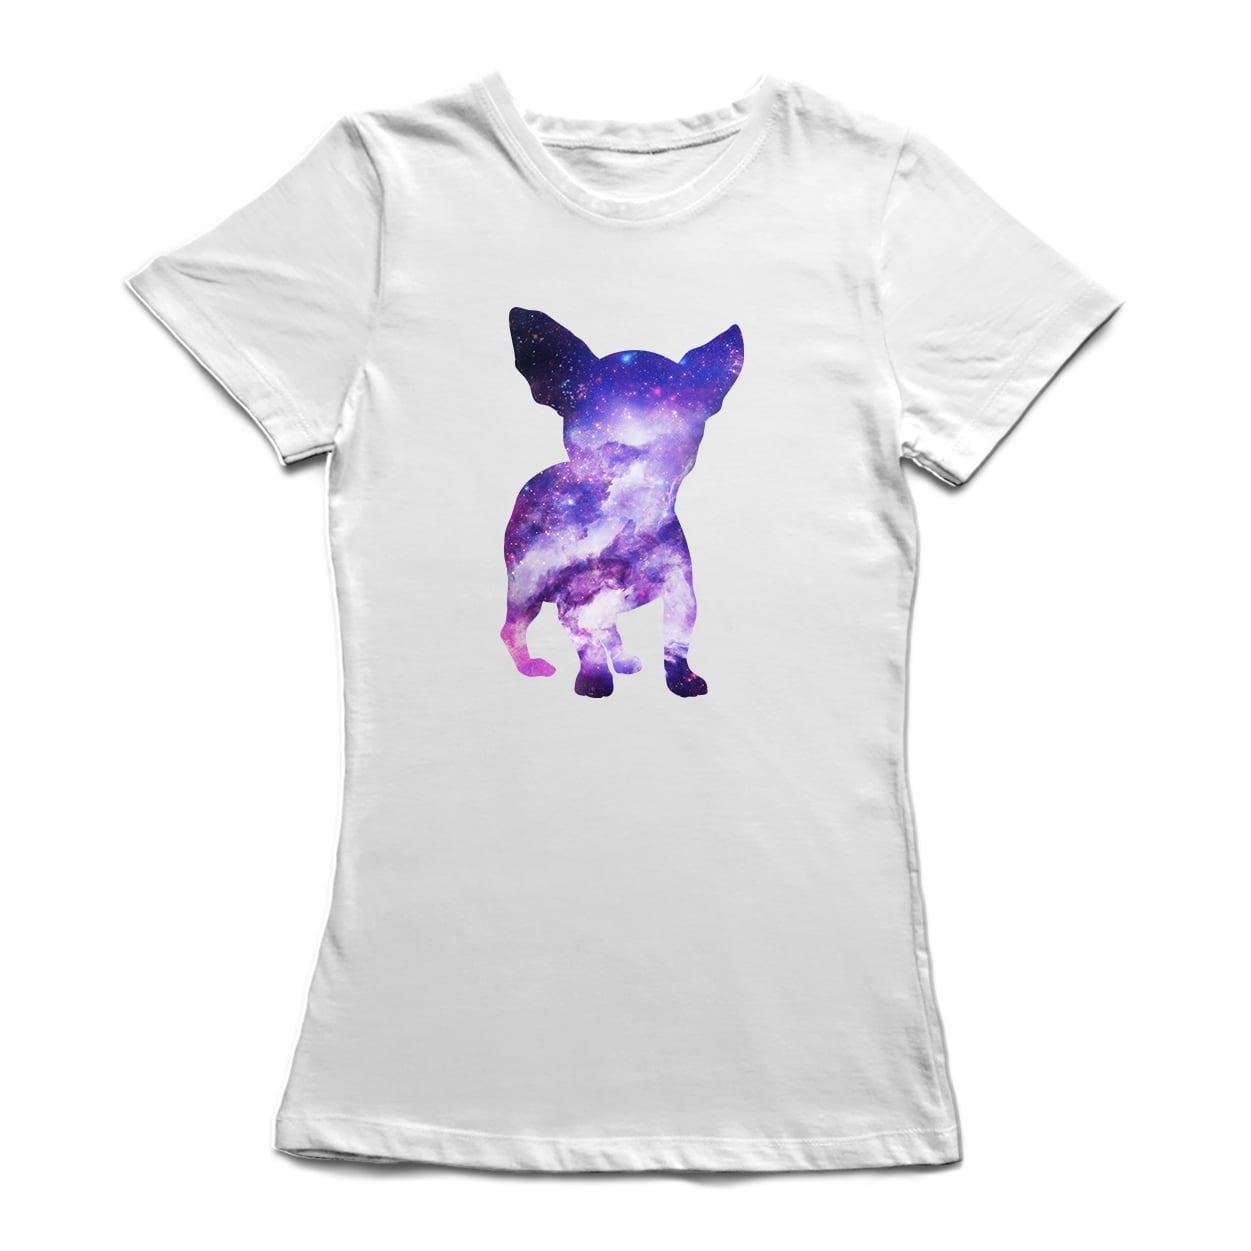 Organic Cotton T-Shirt Mens Ladies Unisex Fit Sorry I Cant I Have Plans With My Chihuahua Dog